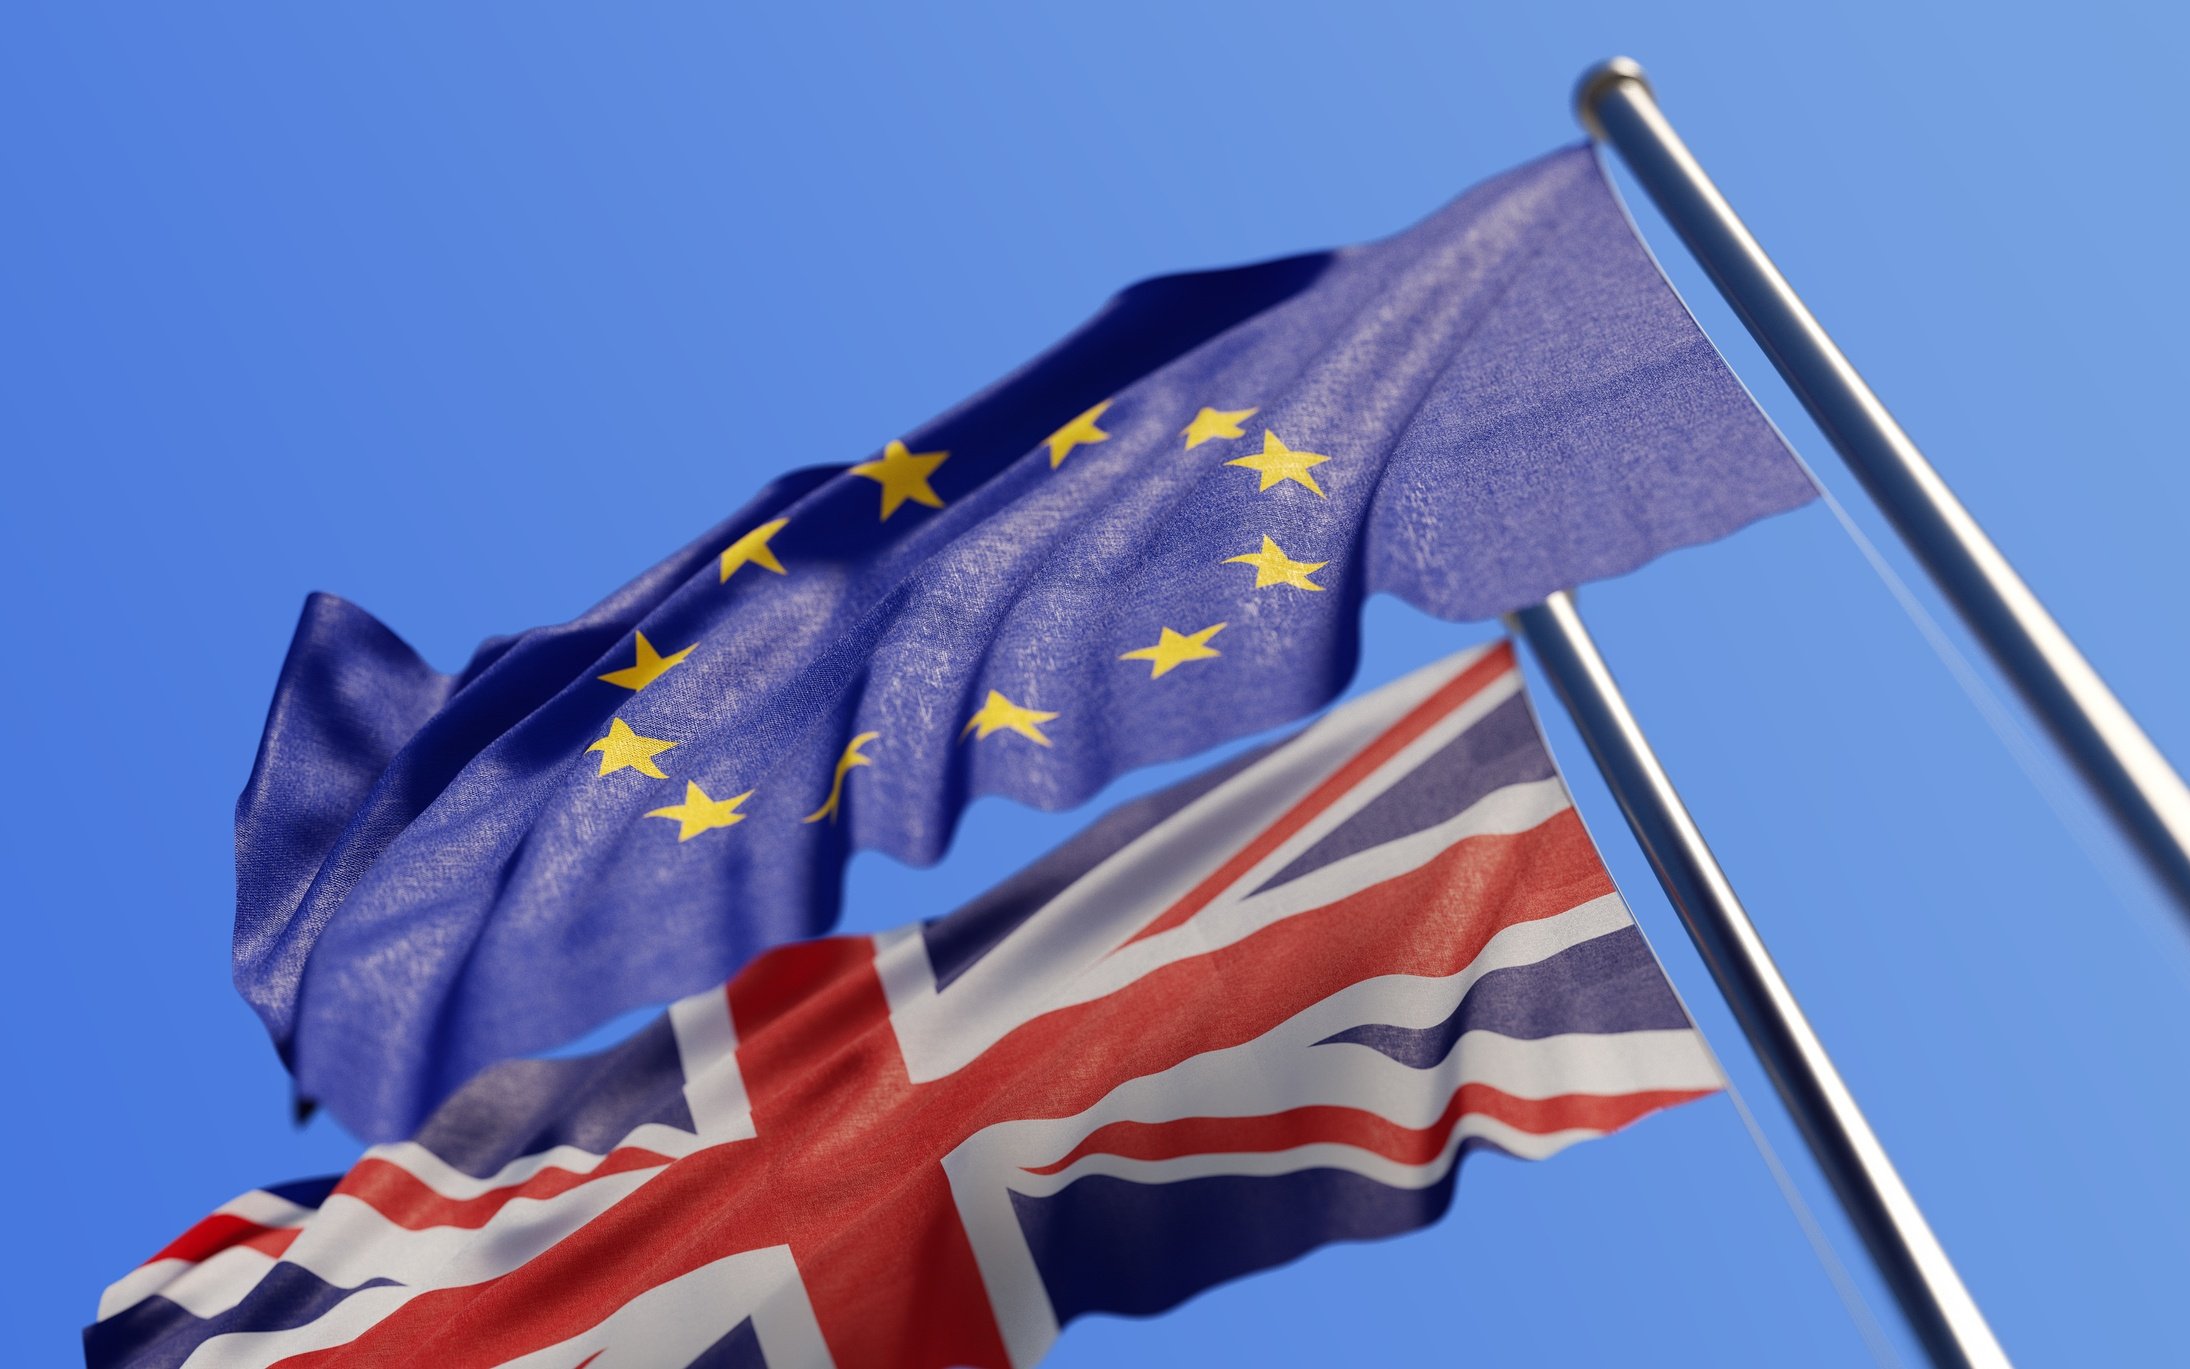 UK Brexit Referendum And What It Means For Gambling And UK Gaming Stocks